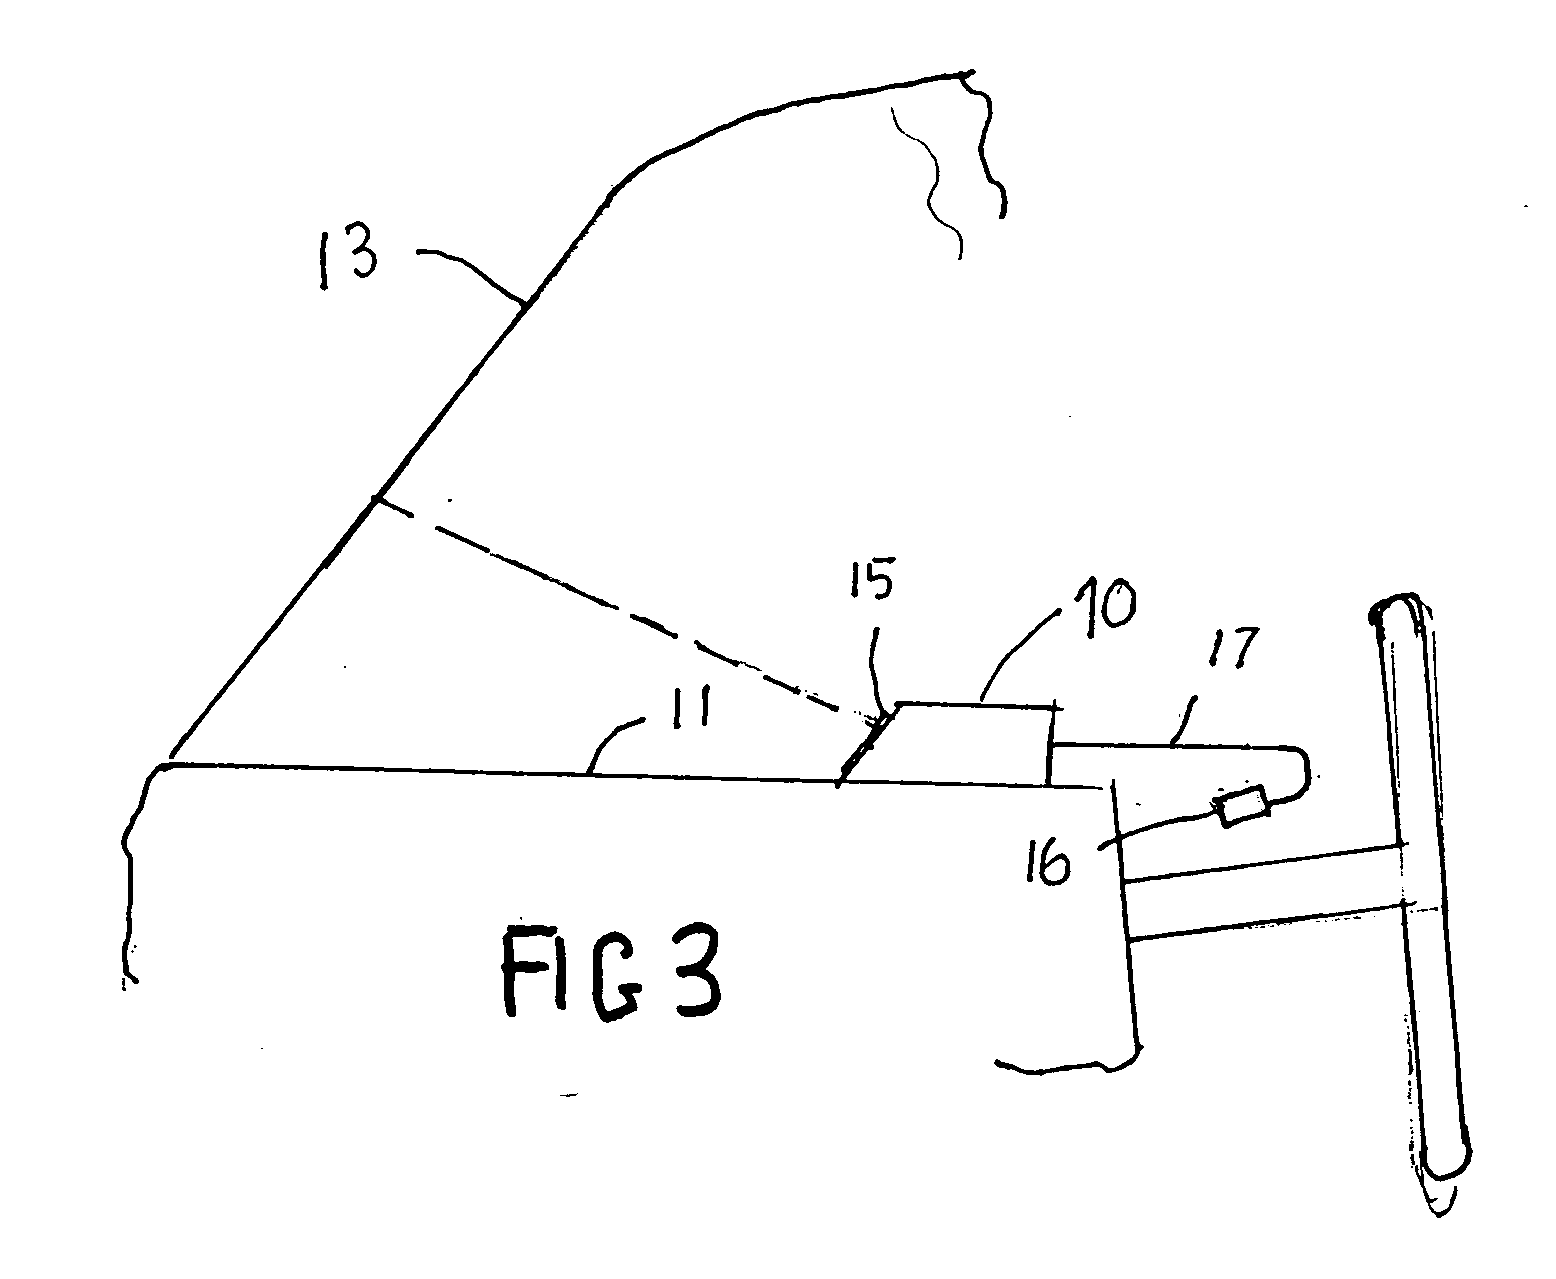 Apparatus for producing heads-up display in a vehicle and associated methods